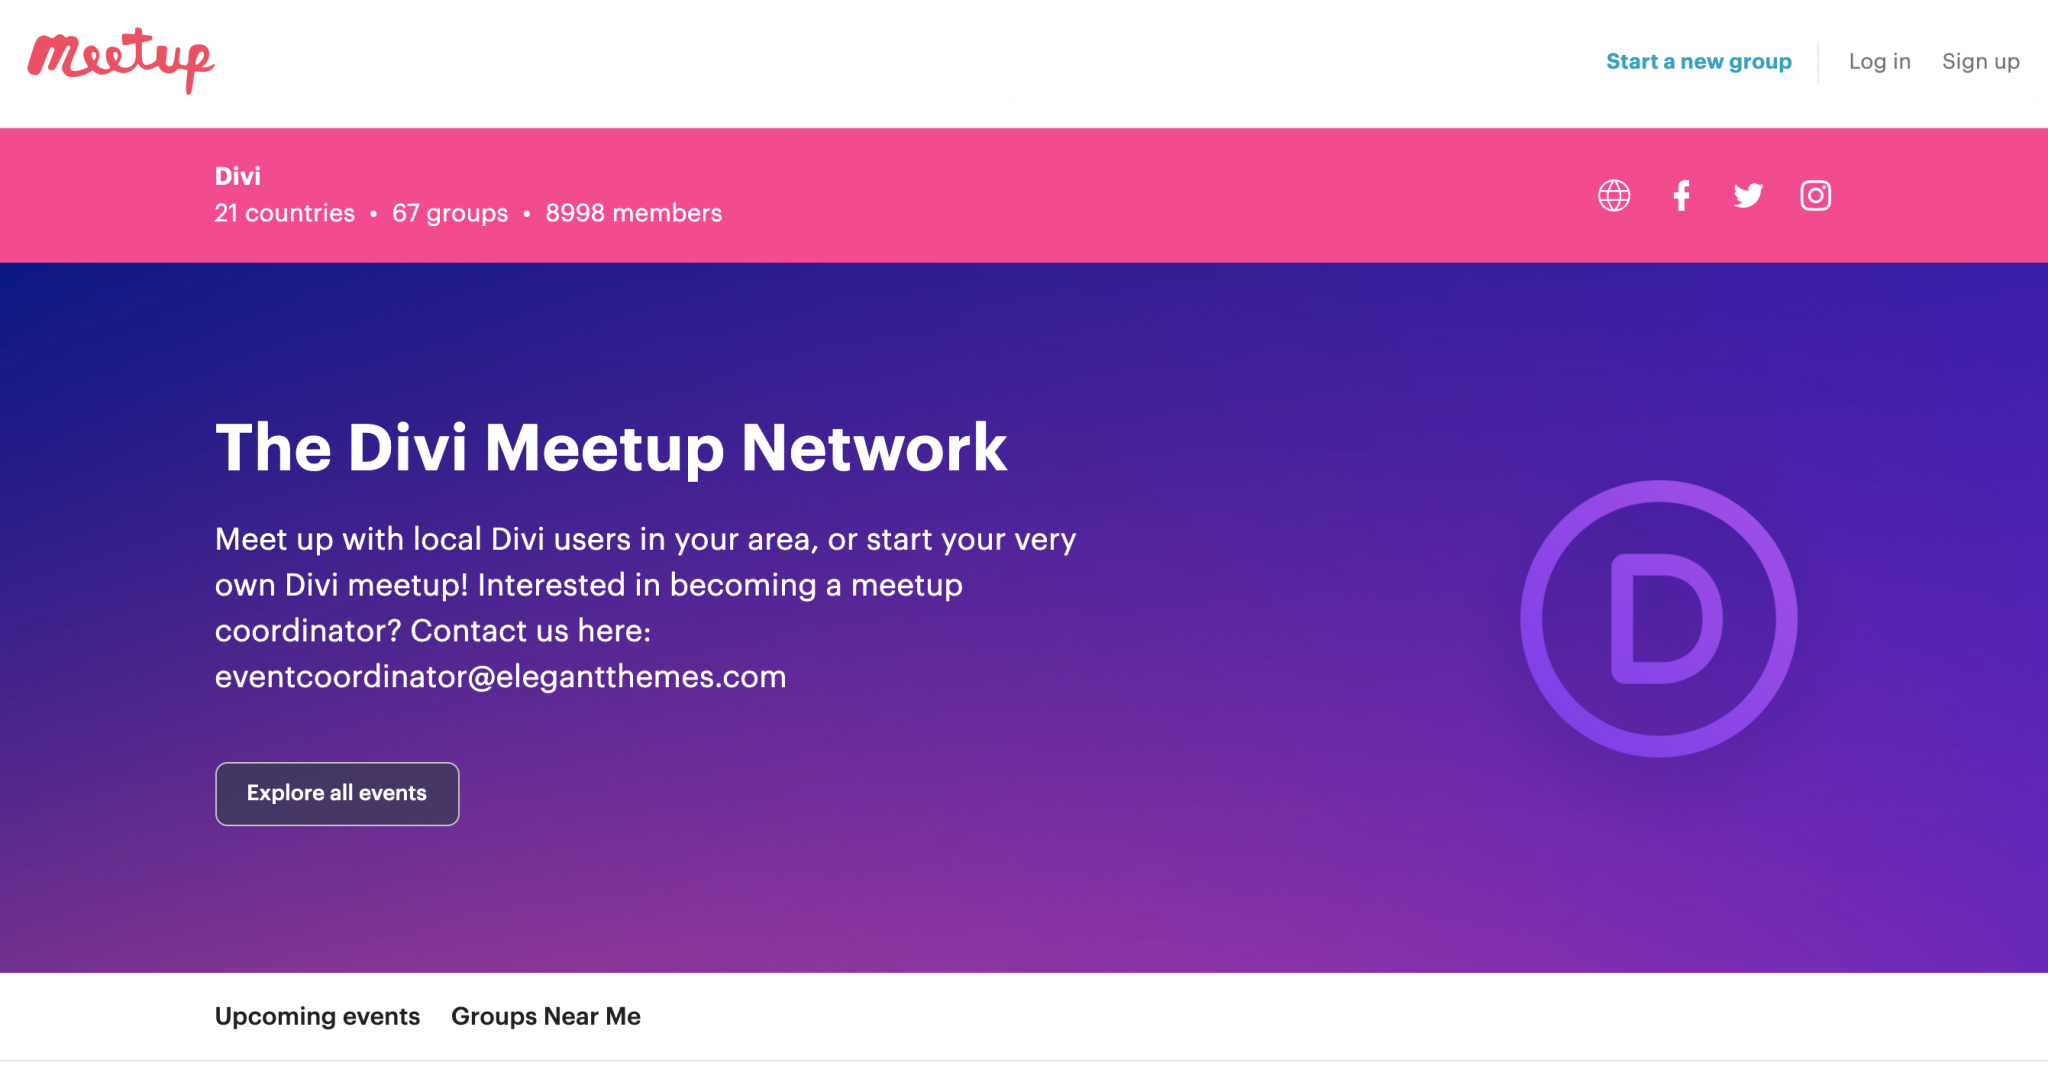 The Divi Meetup Network homepage